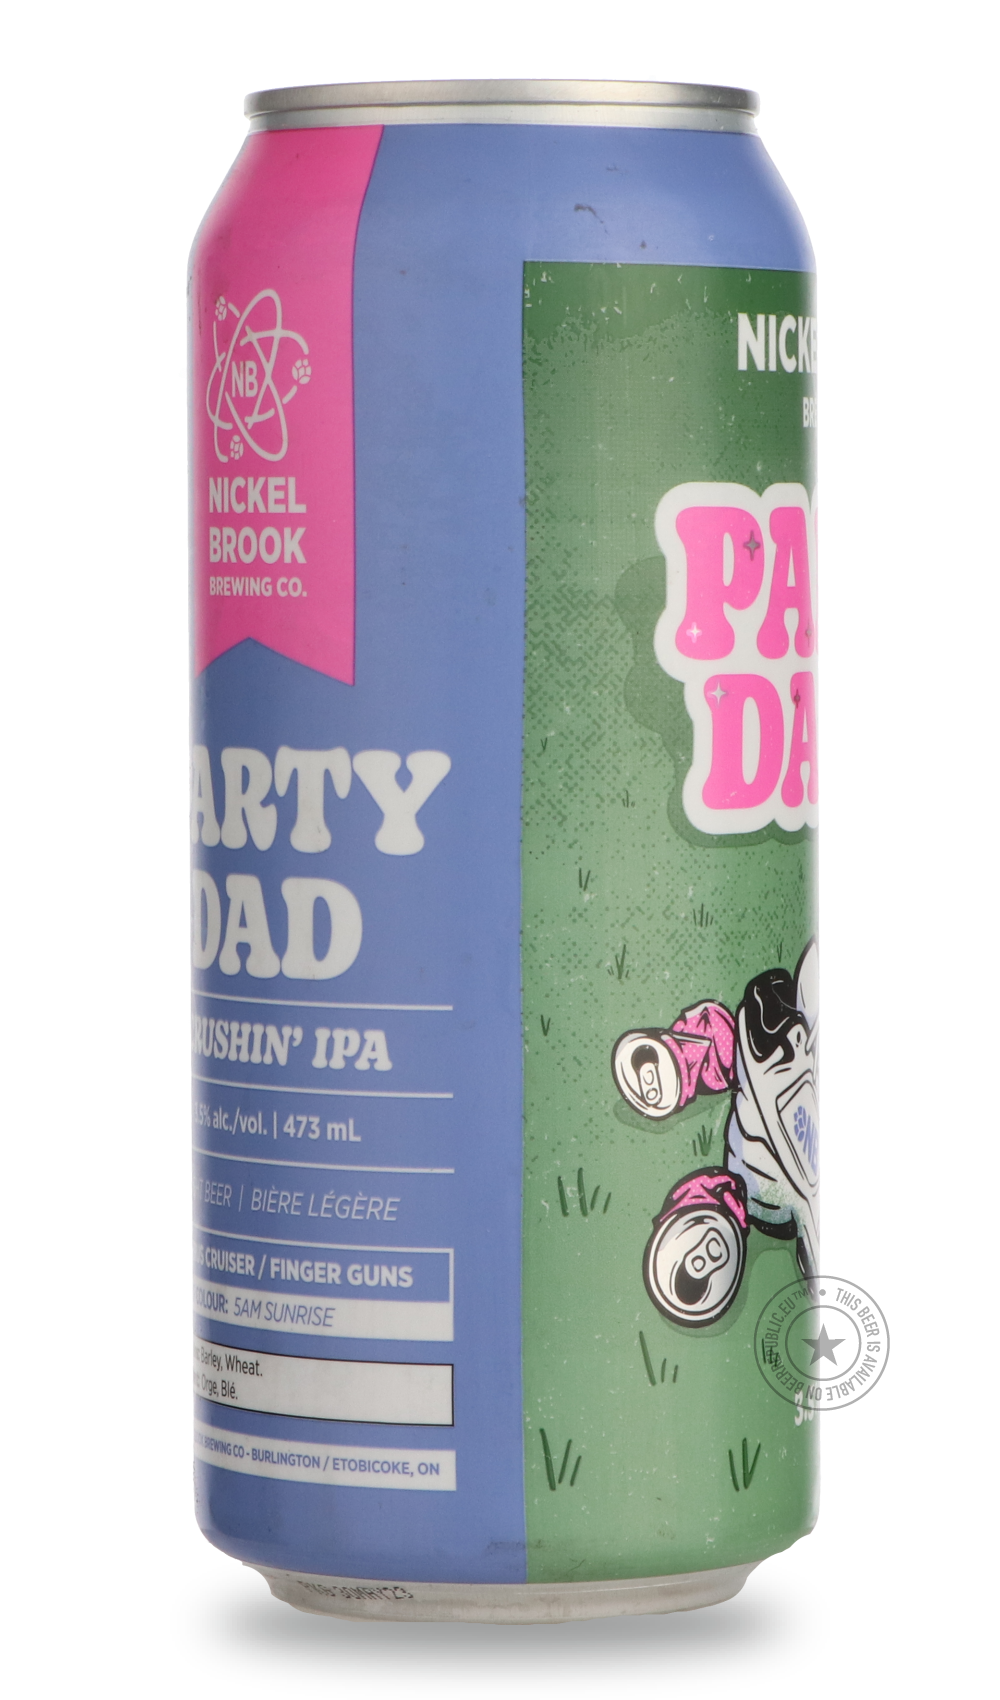 -Nickel Brook- Party Dad-IPA- Only @ Beer Republic - The best online beer store for American & Canadian craft beer - Buy beer online from the USA and Canada - Bier online kopen - Amerikaans bier kopen - Craft beer store - Craft beer kopen - Amerikanisch bier kaufen - Bier online kaufen - Acheter biere online - IPA - Stout - Porter - New England IPA - Hazy IPA - Imperial Stout - Barrel Aged - Barrel Aged Imperial Stout - Brown - Dark beer - Blond - Blonde - Pilsner - Lager - Wheat - Weizen - Amber - Barley W